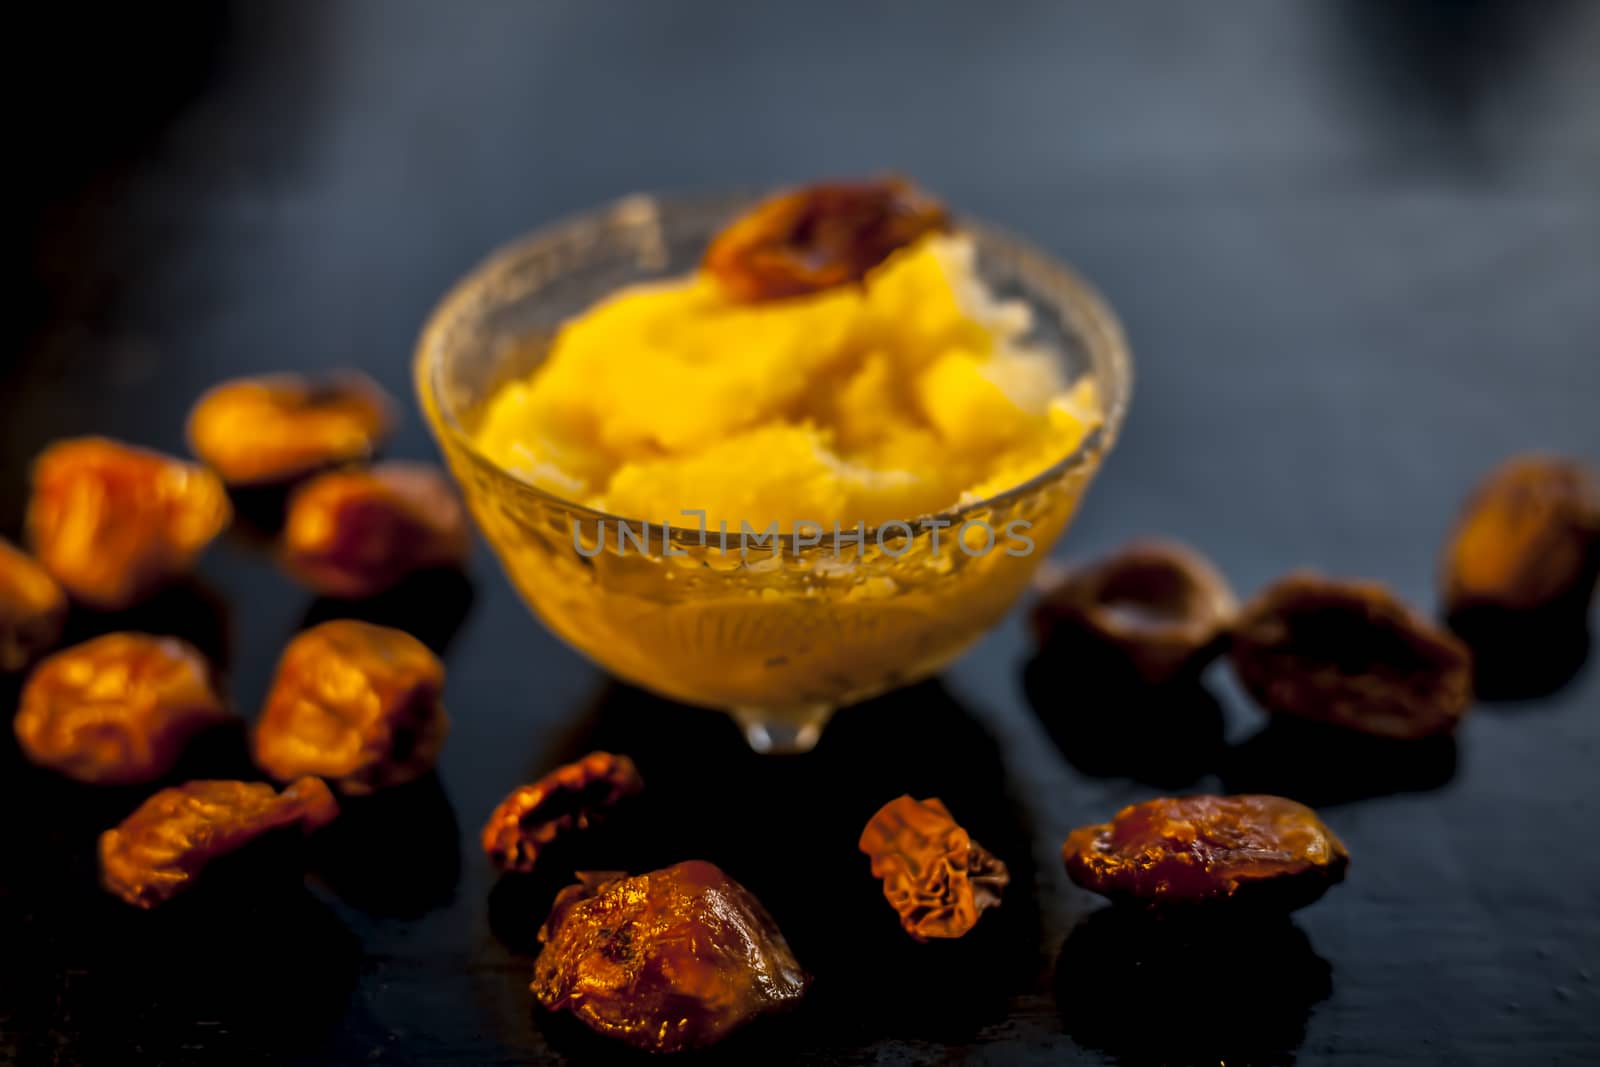 Close up shot of dates soaked in ghee for better stamina and health on black wooden surface along with ghee or clarified butter. Horizontal shot. by mirzamlk